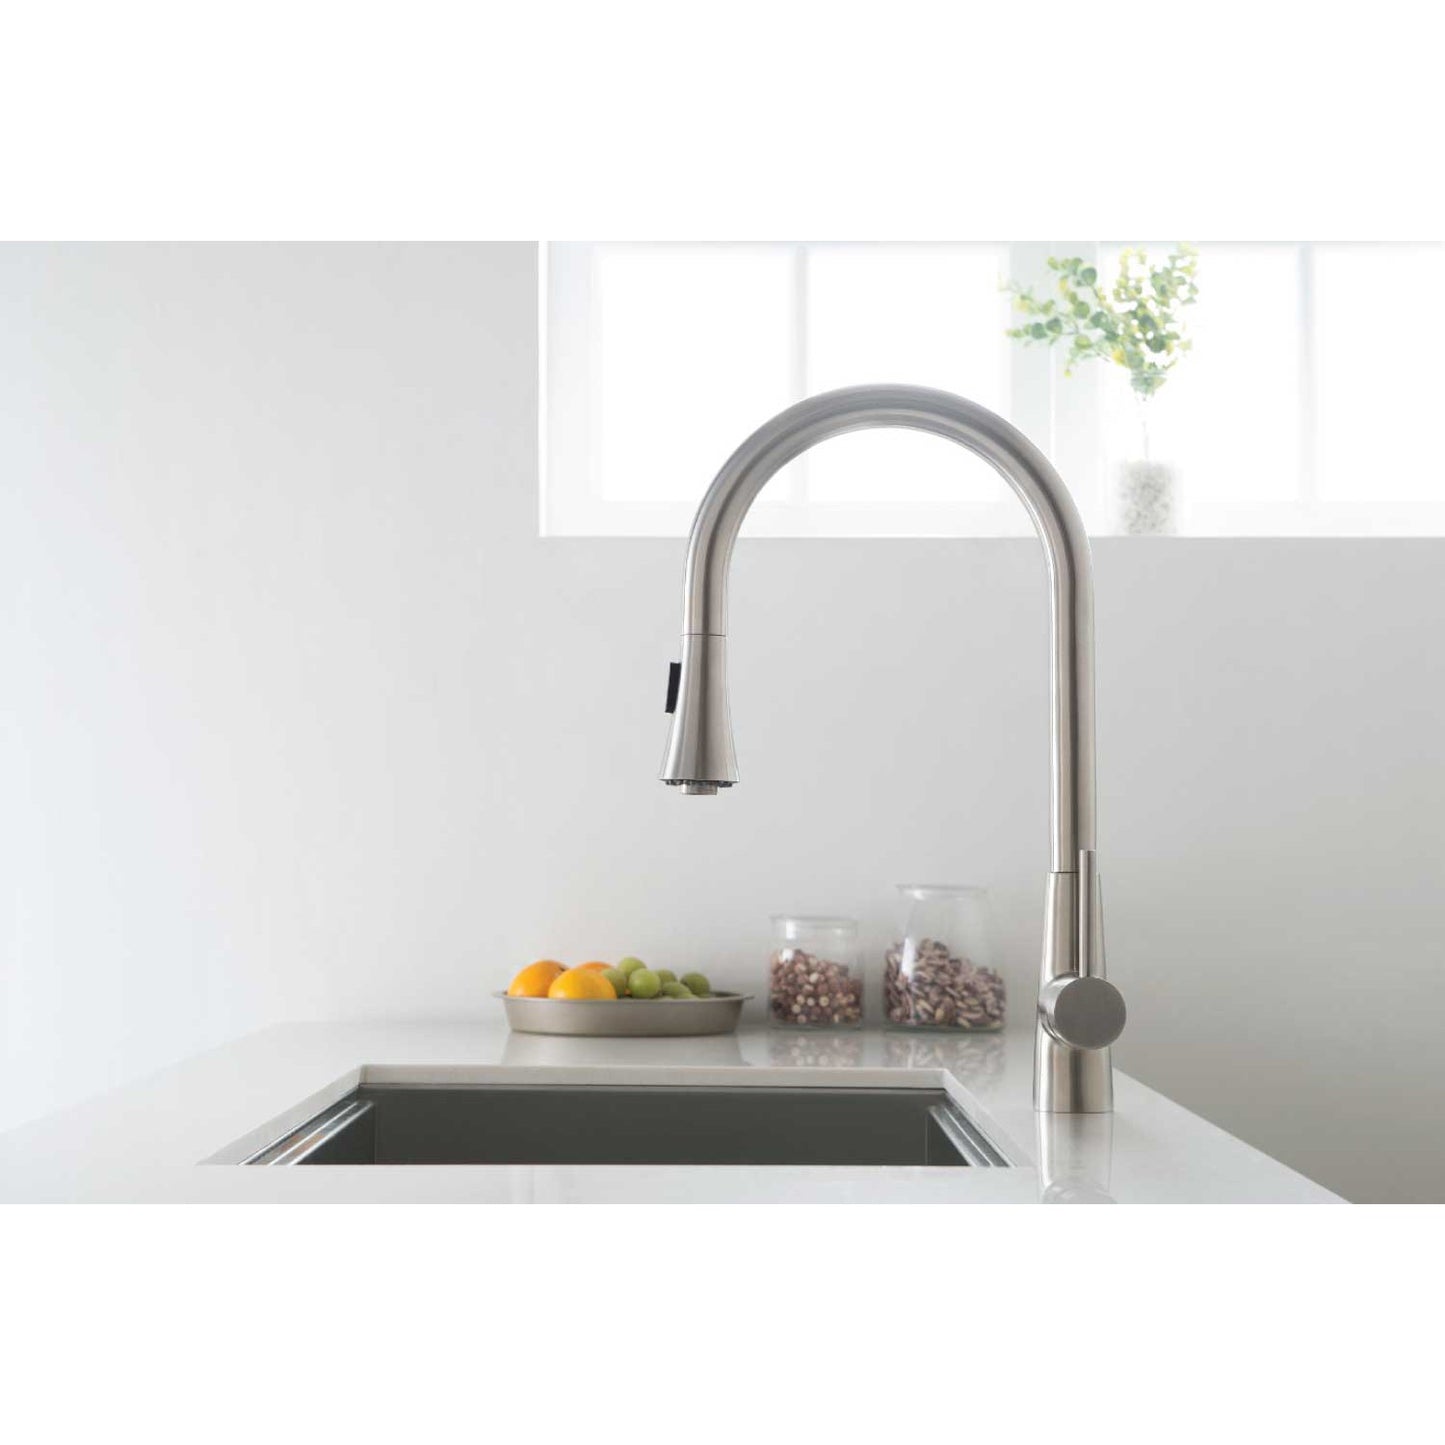 Isenberg Klassiker Zest 18" Single Hole Navy Blue Stainless Steel Pull-Down Kitchen Faucet With Dual Function Sprayer